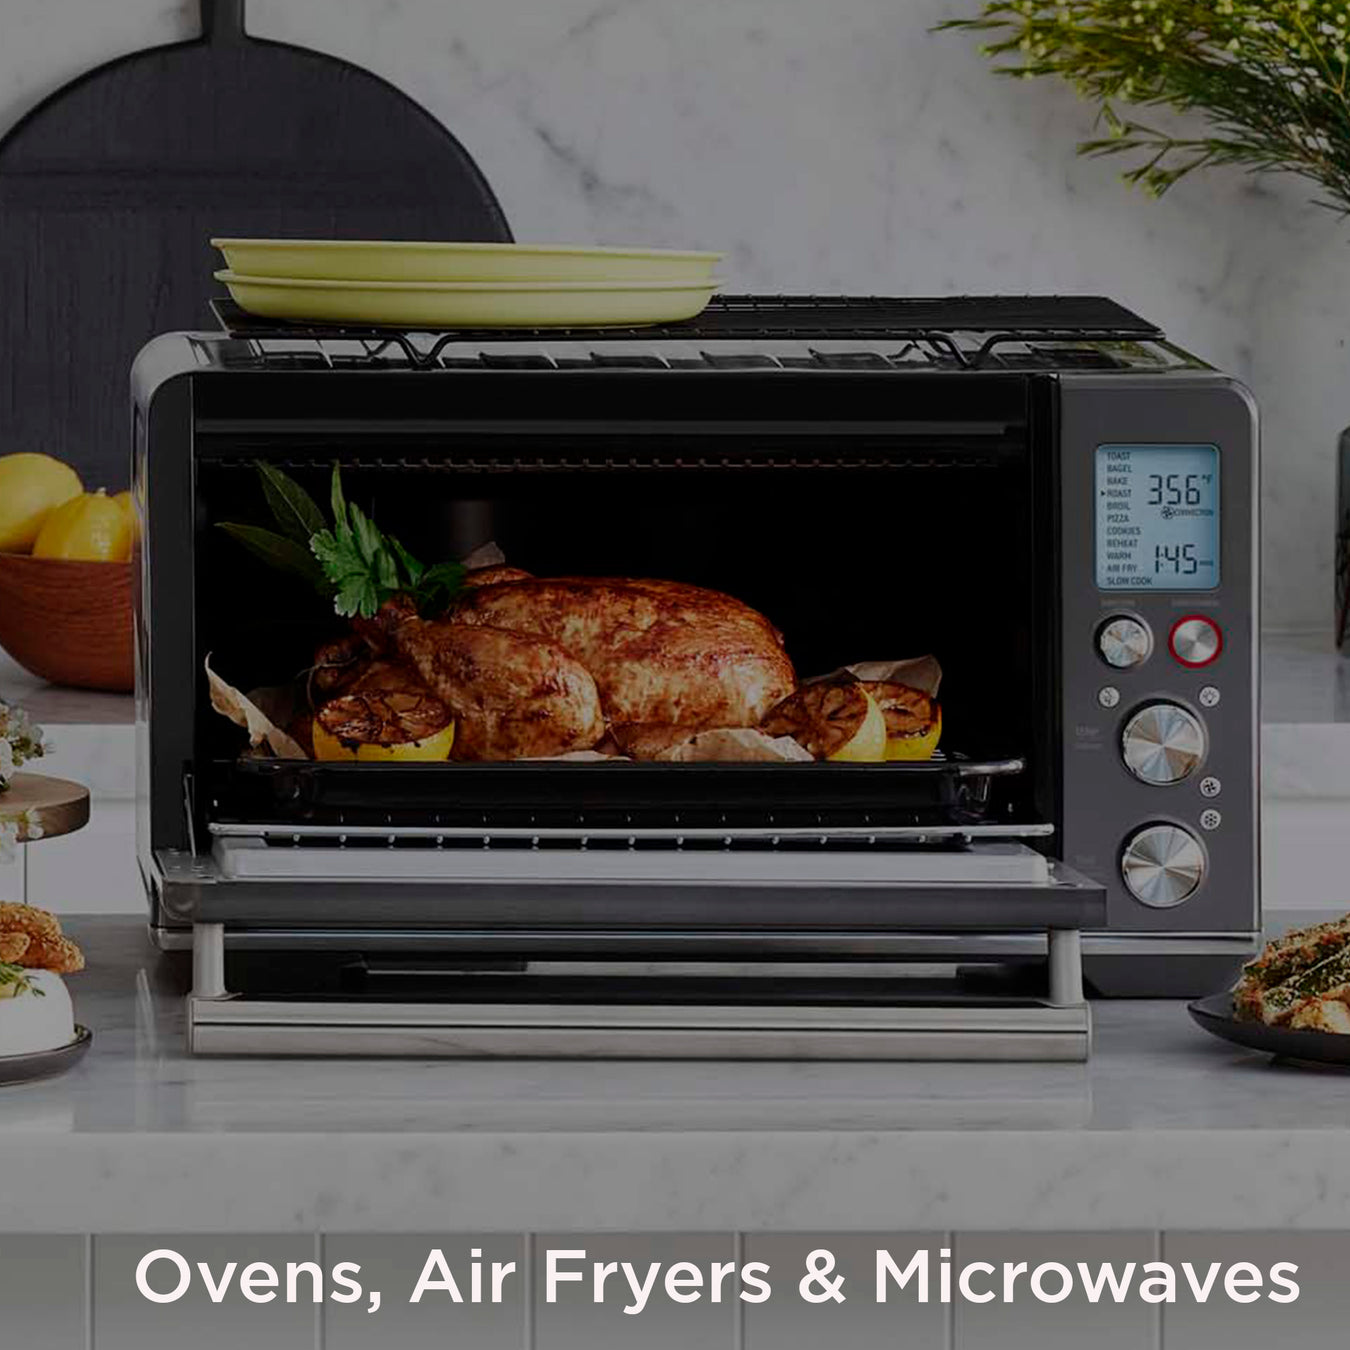 Breville Ovens, Air Fryers & Microwaves